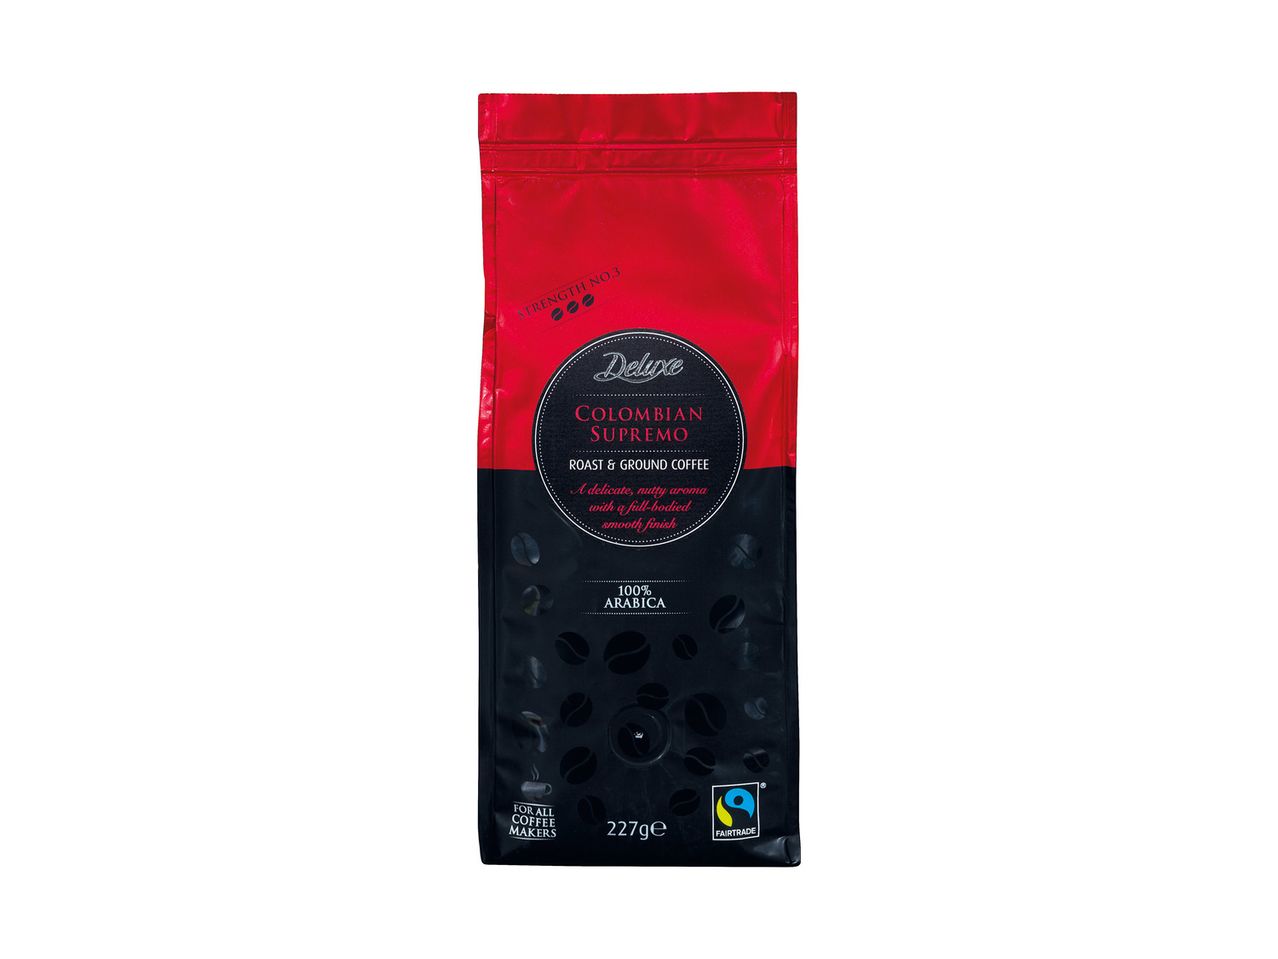 Go to full screen view: Deluxe Columbian Roast & Ground Coffee - Image 1